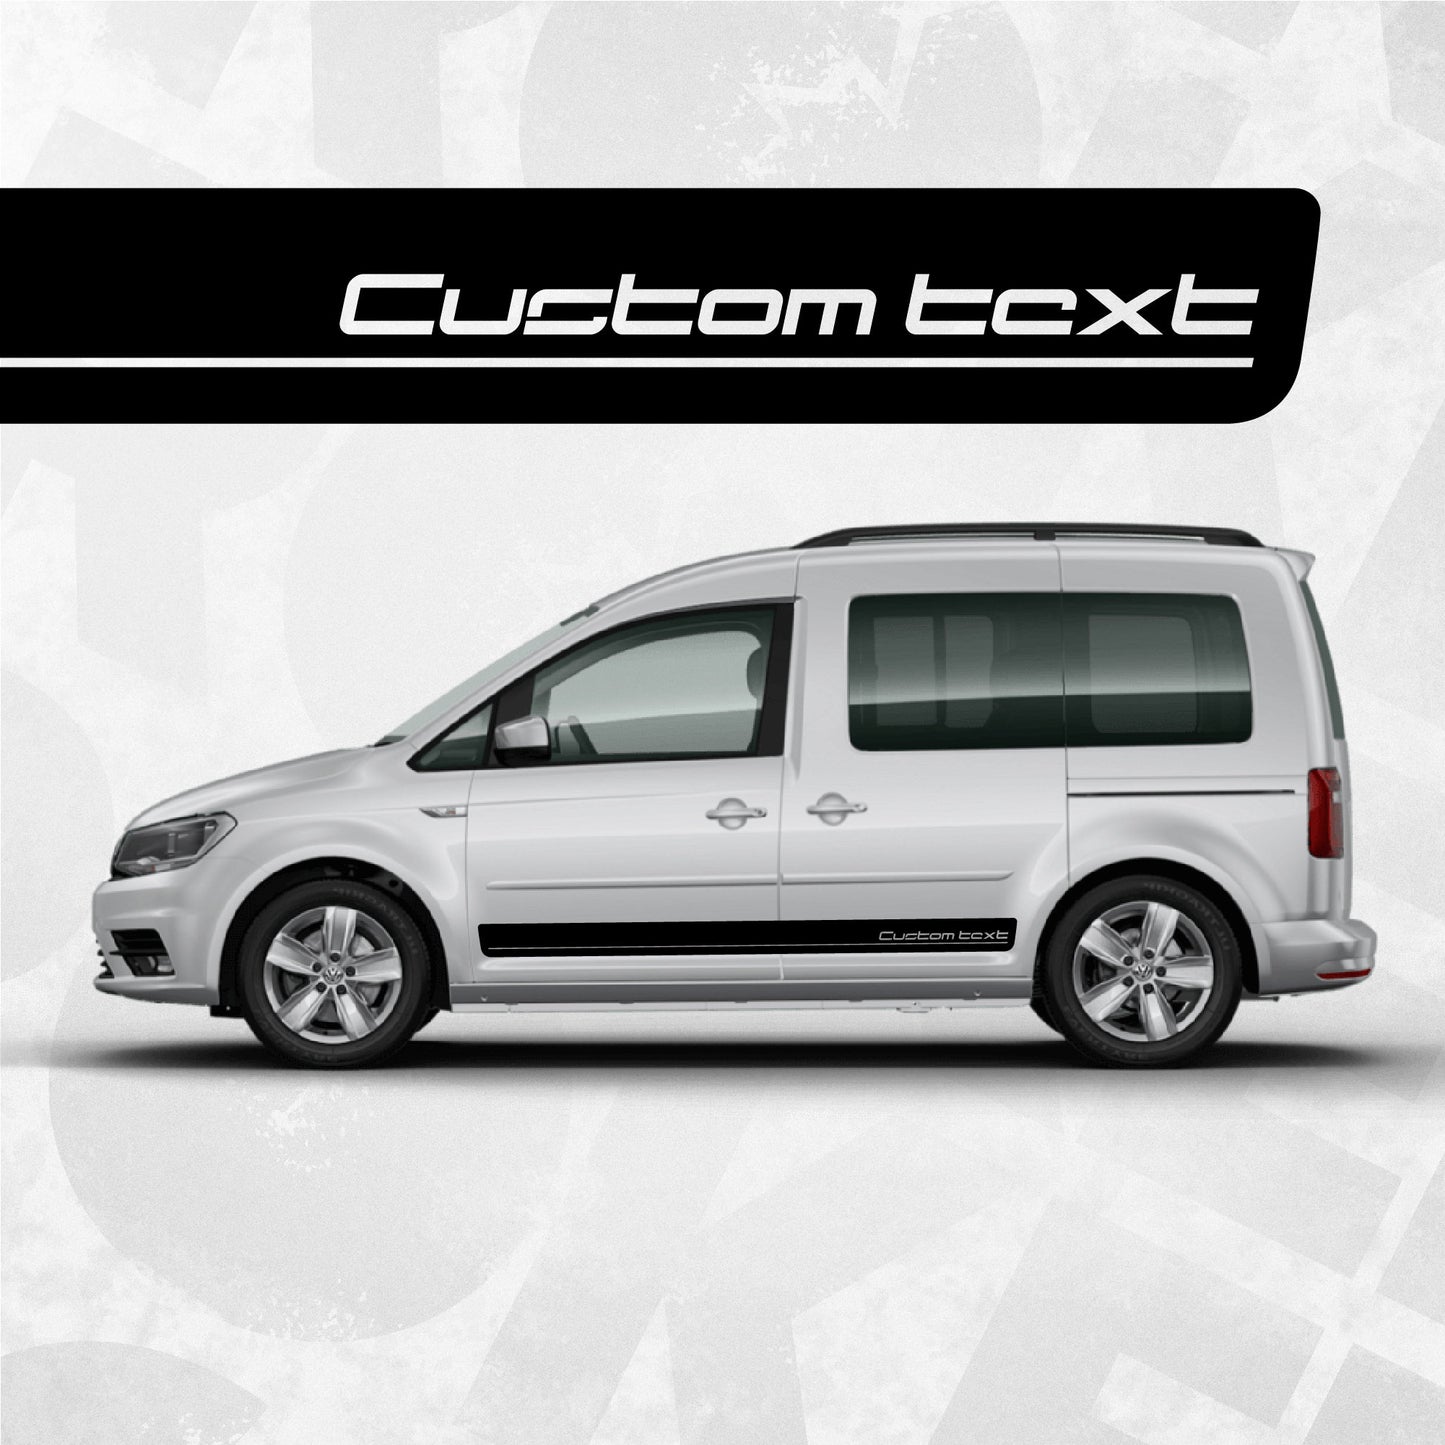 VW CADDY custom text logo decal - side stripe graphics sticker kit with your text, company name, logo, website